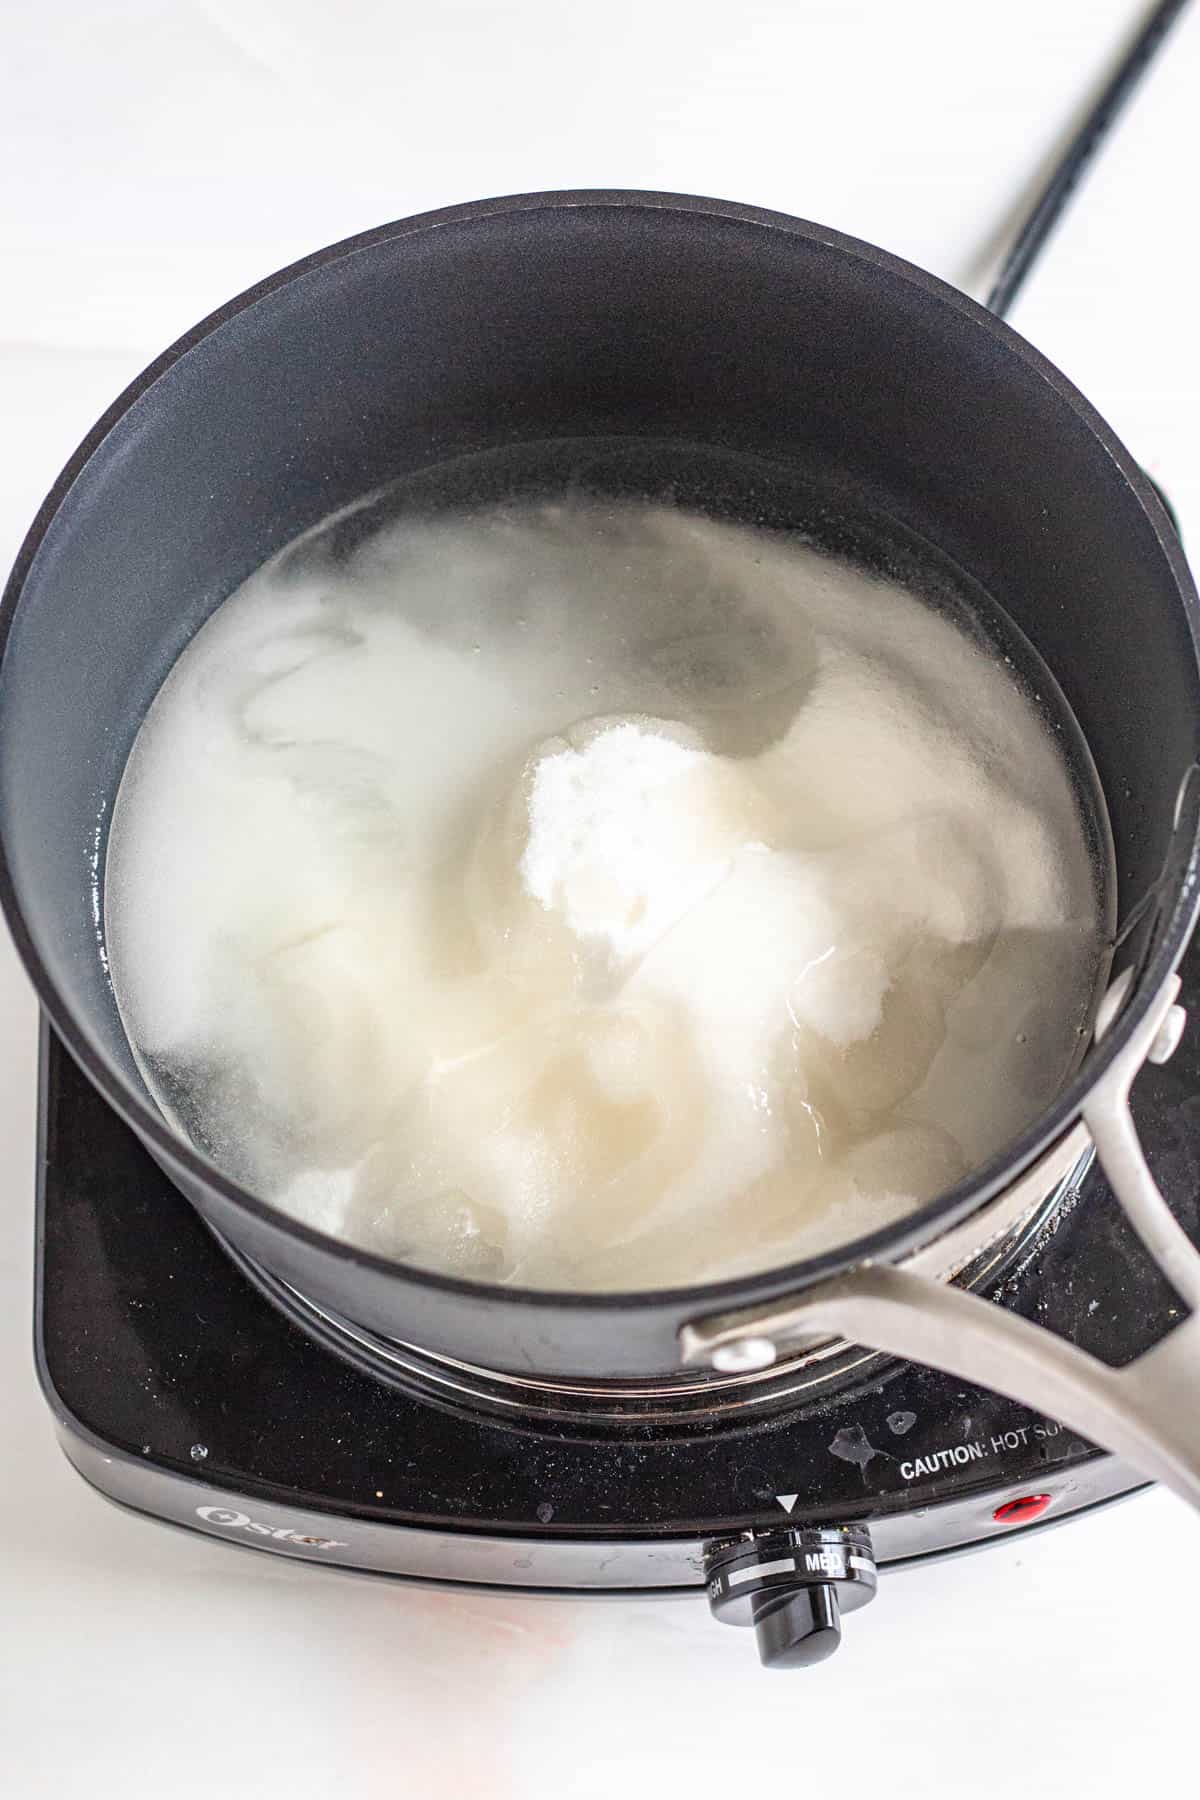 water and sugar in a pot ready to boil with a light colored background